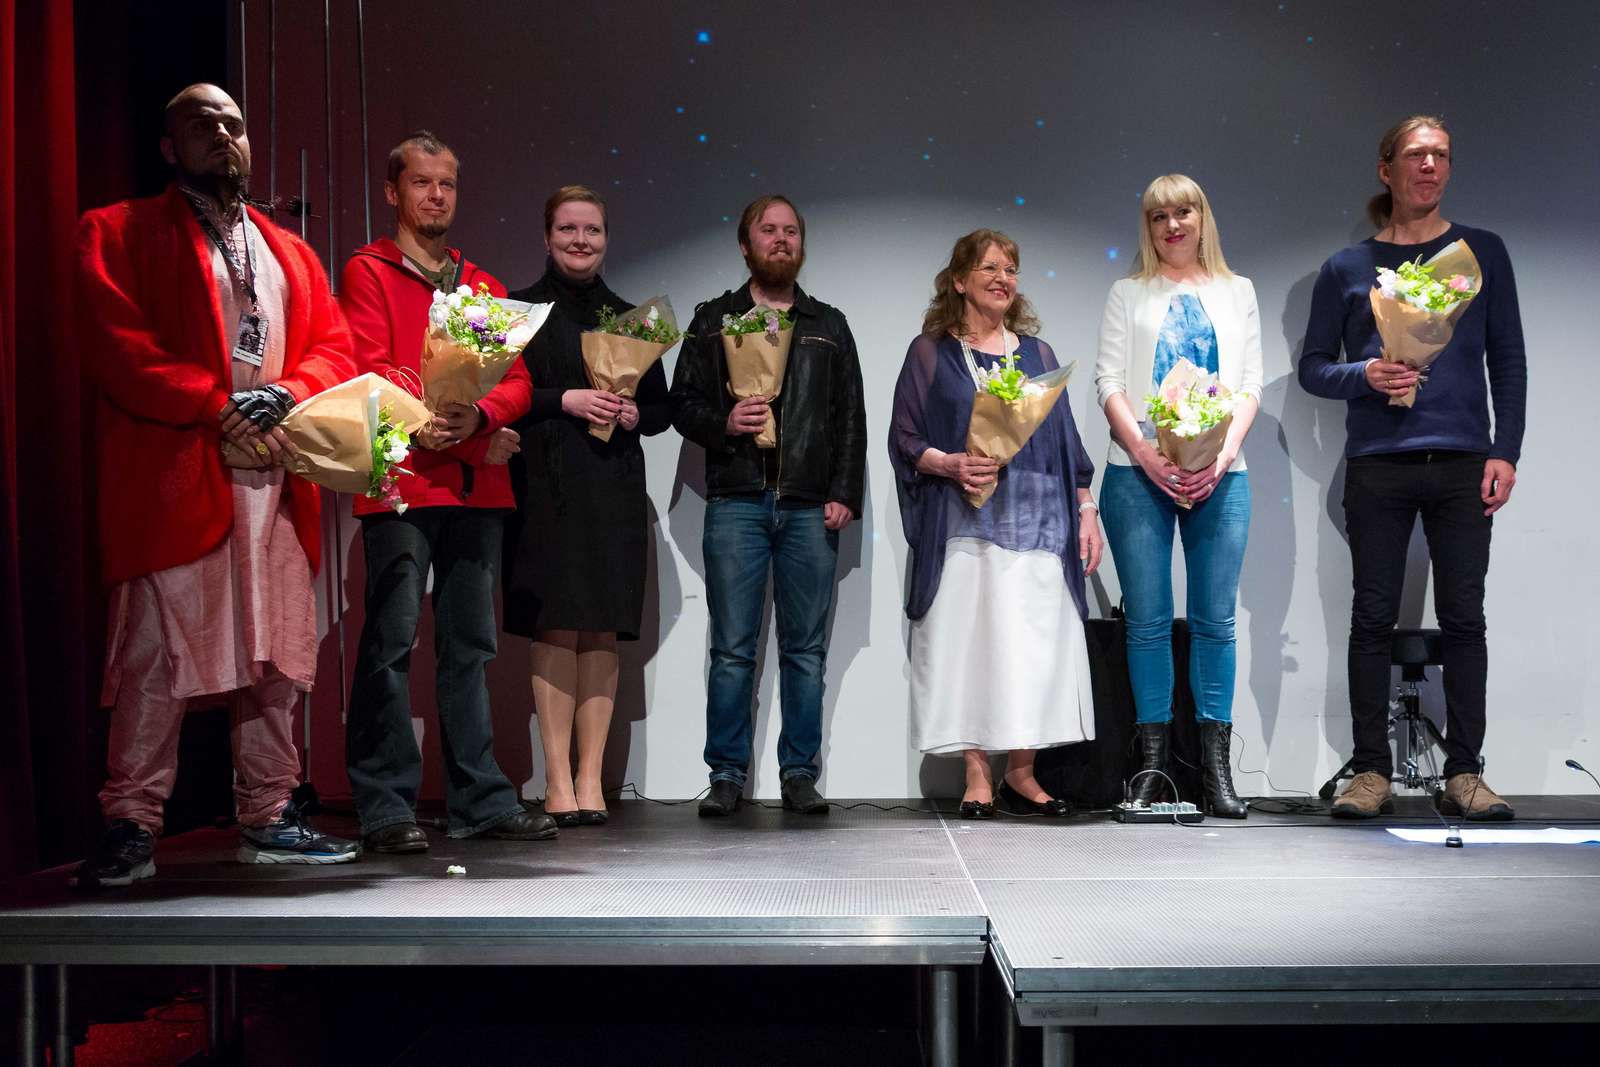 Nordic Council Music Prize 2015 nominees.